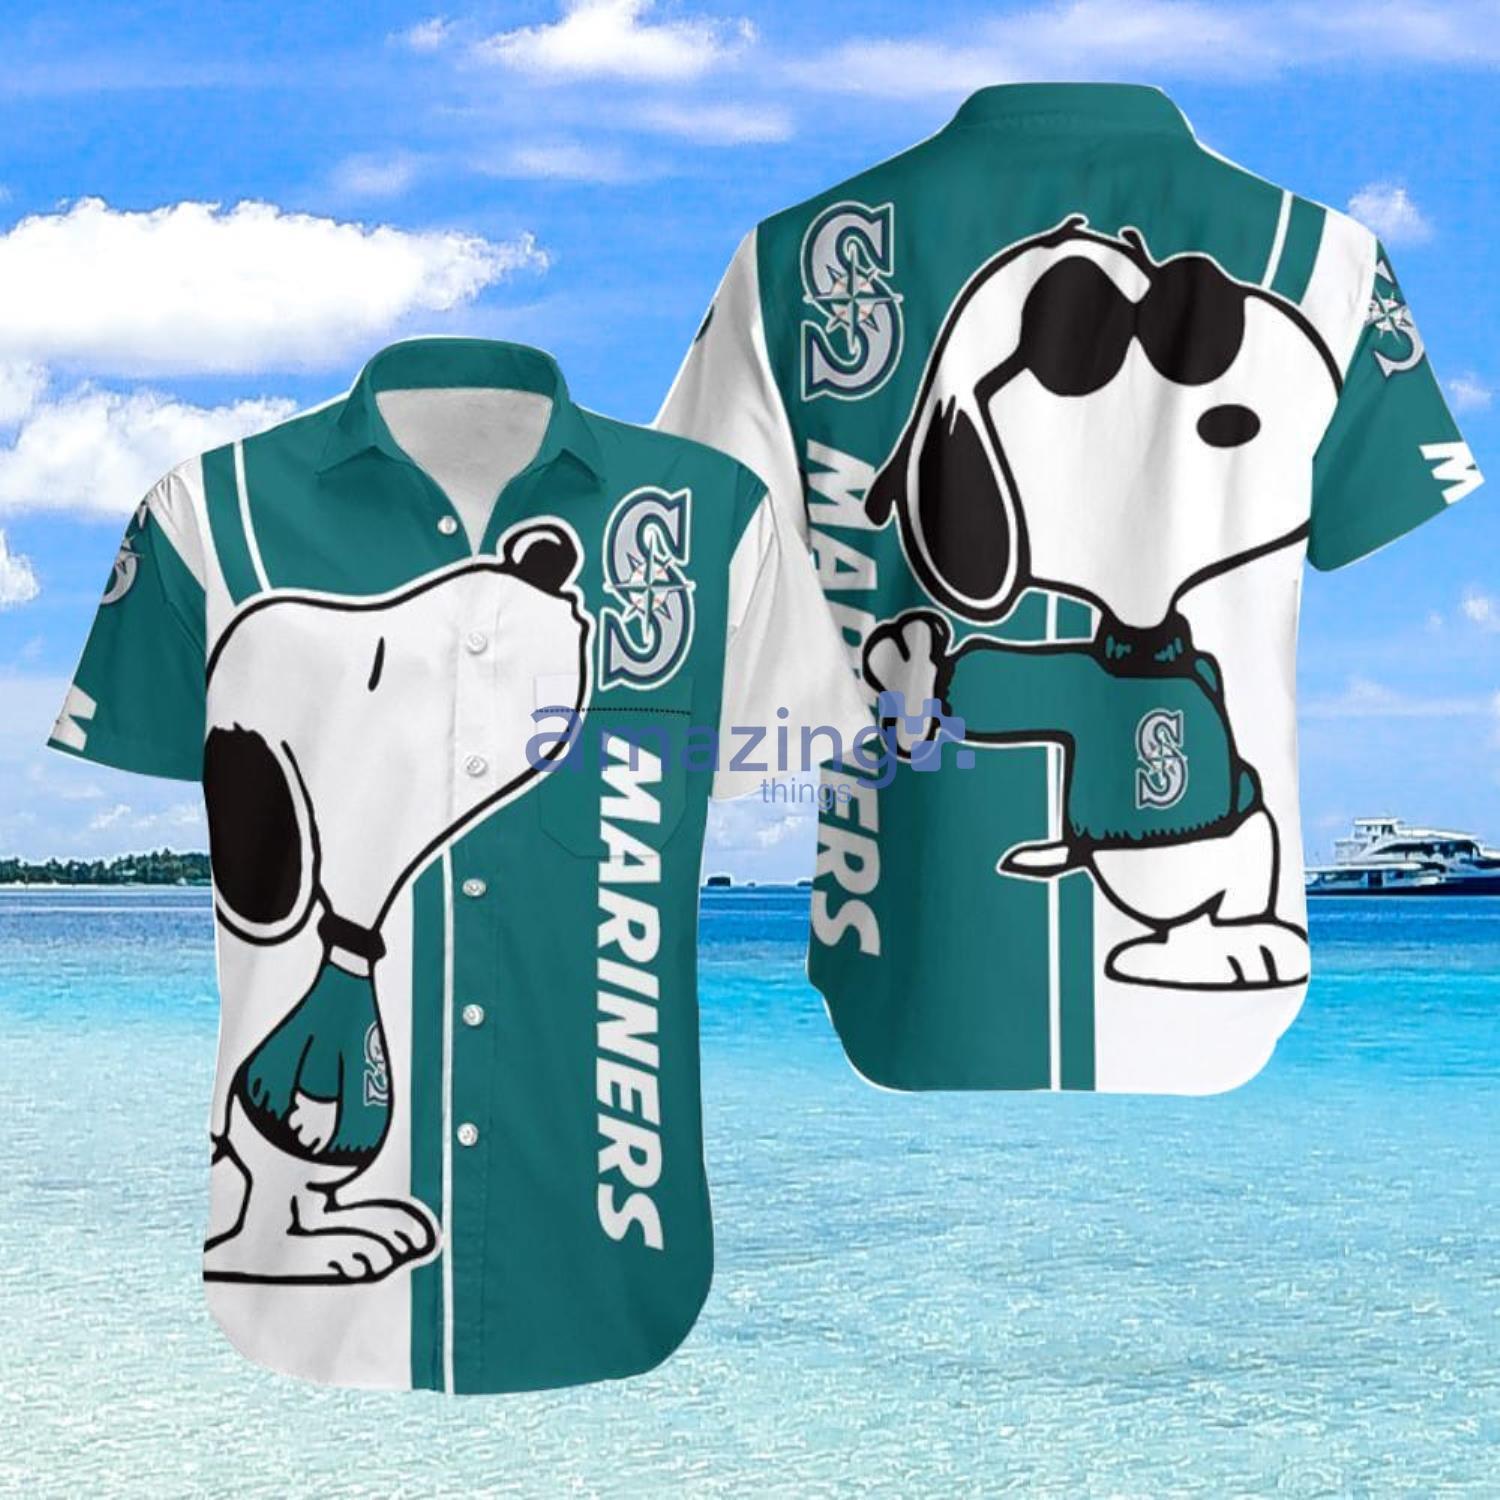 Seattle Mariners Snoopy Lover Polo Shirt For Sport Fans